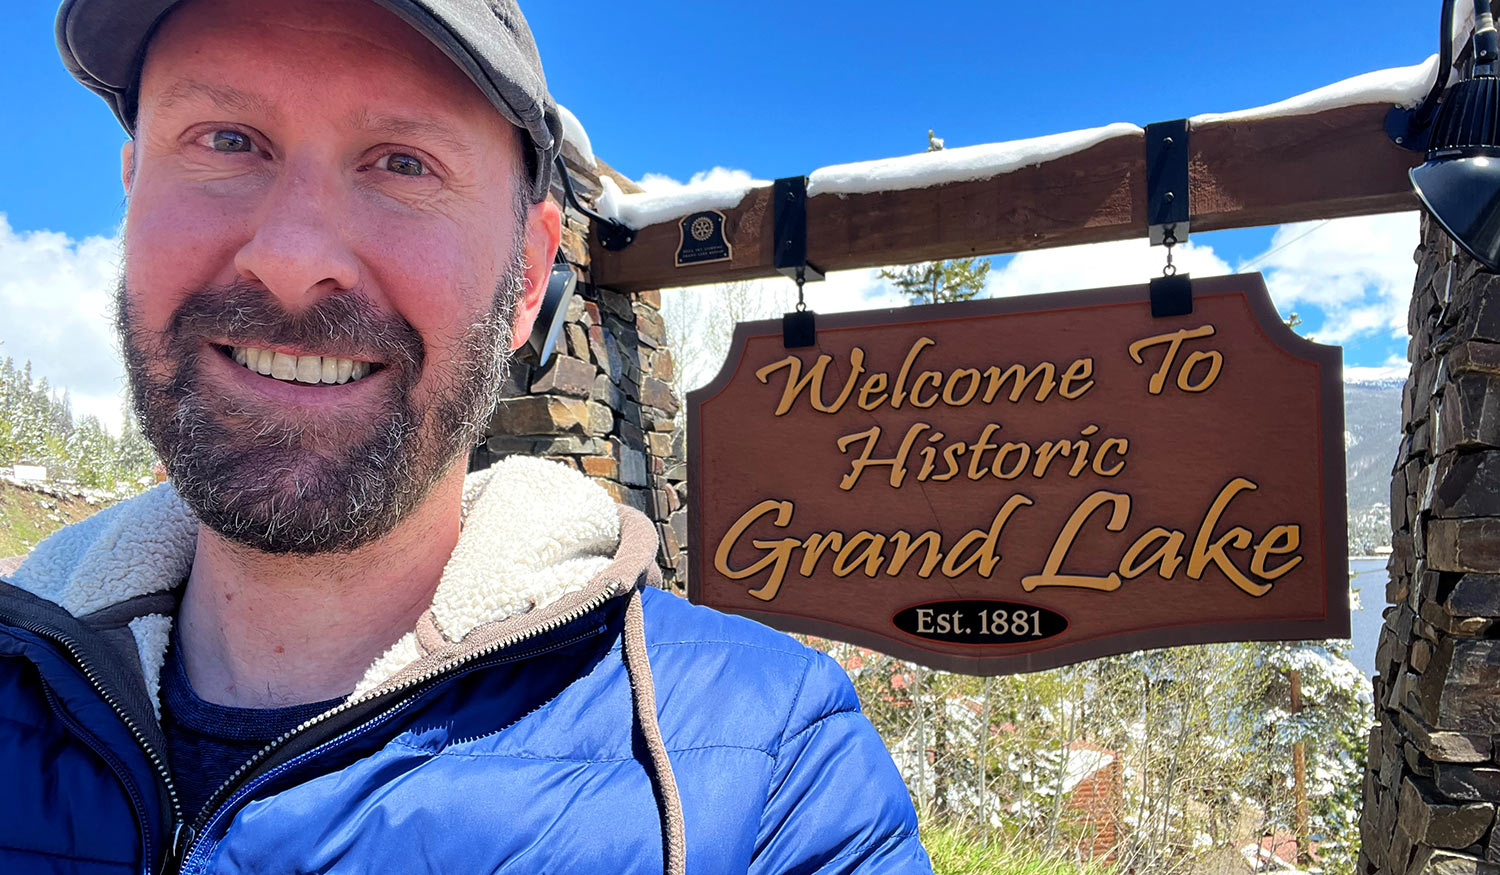 Welcome to historic Grand Lake